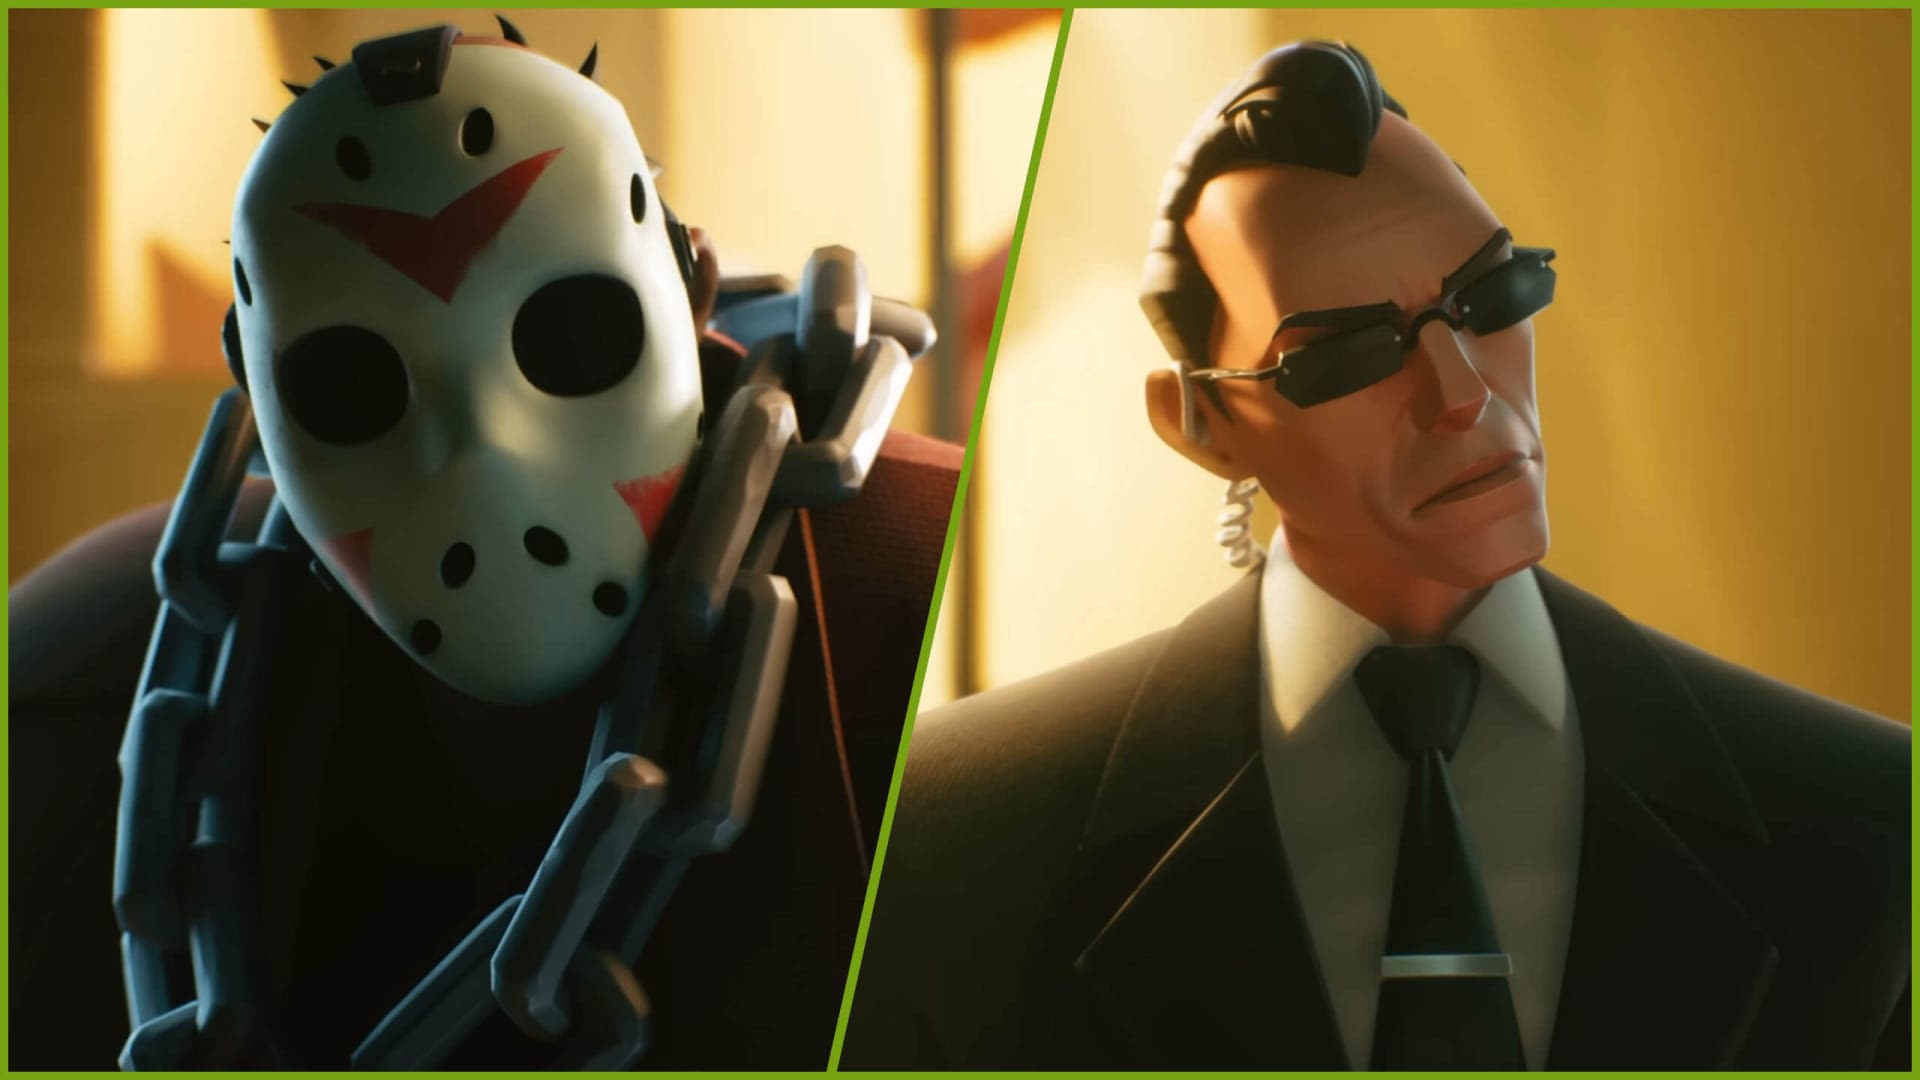 MultiVersus Reveals Jason Voorhees and Agent Smith in New Trailer